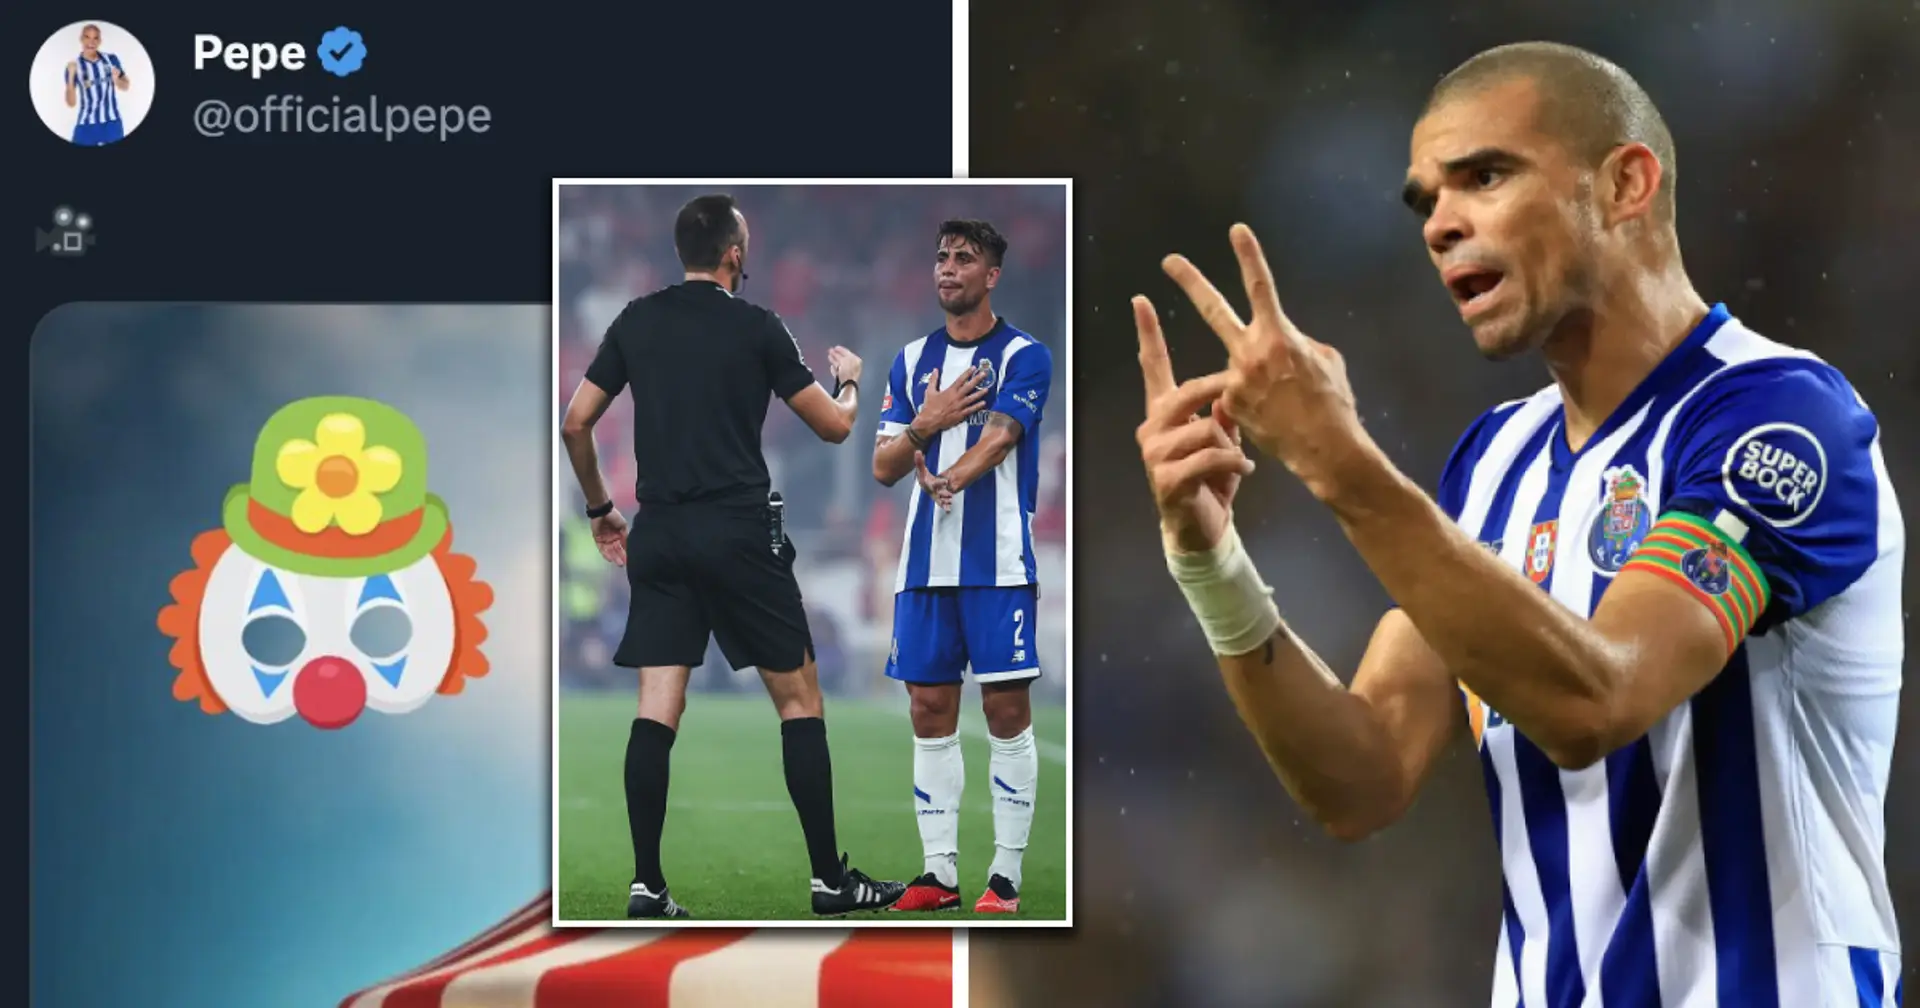 Pepe can be suspended for 4 games after sharing a tweet of a clown circus